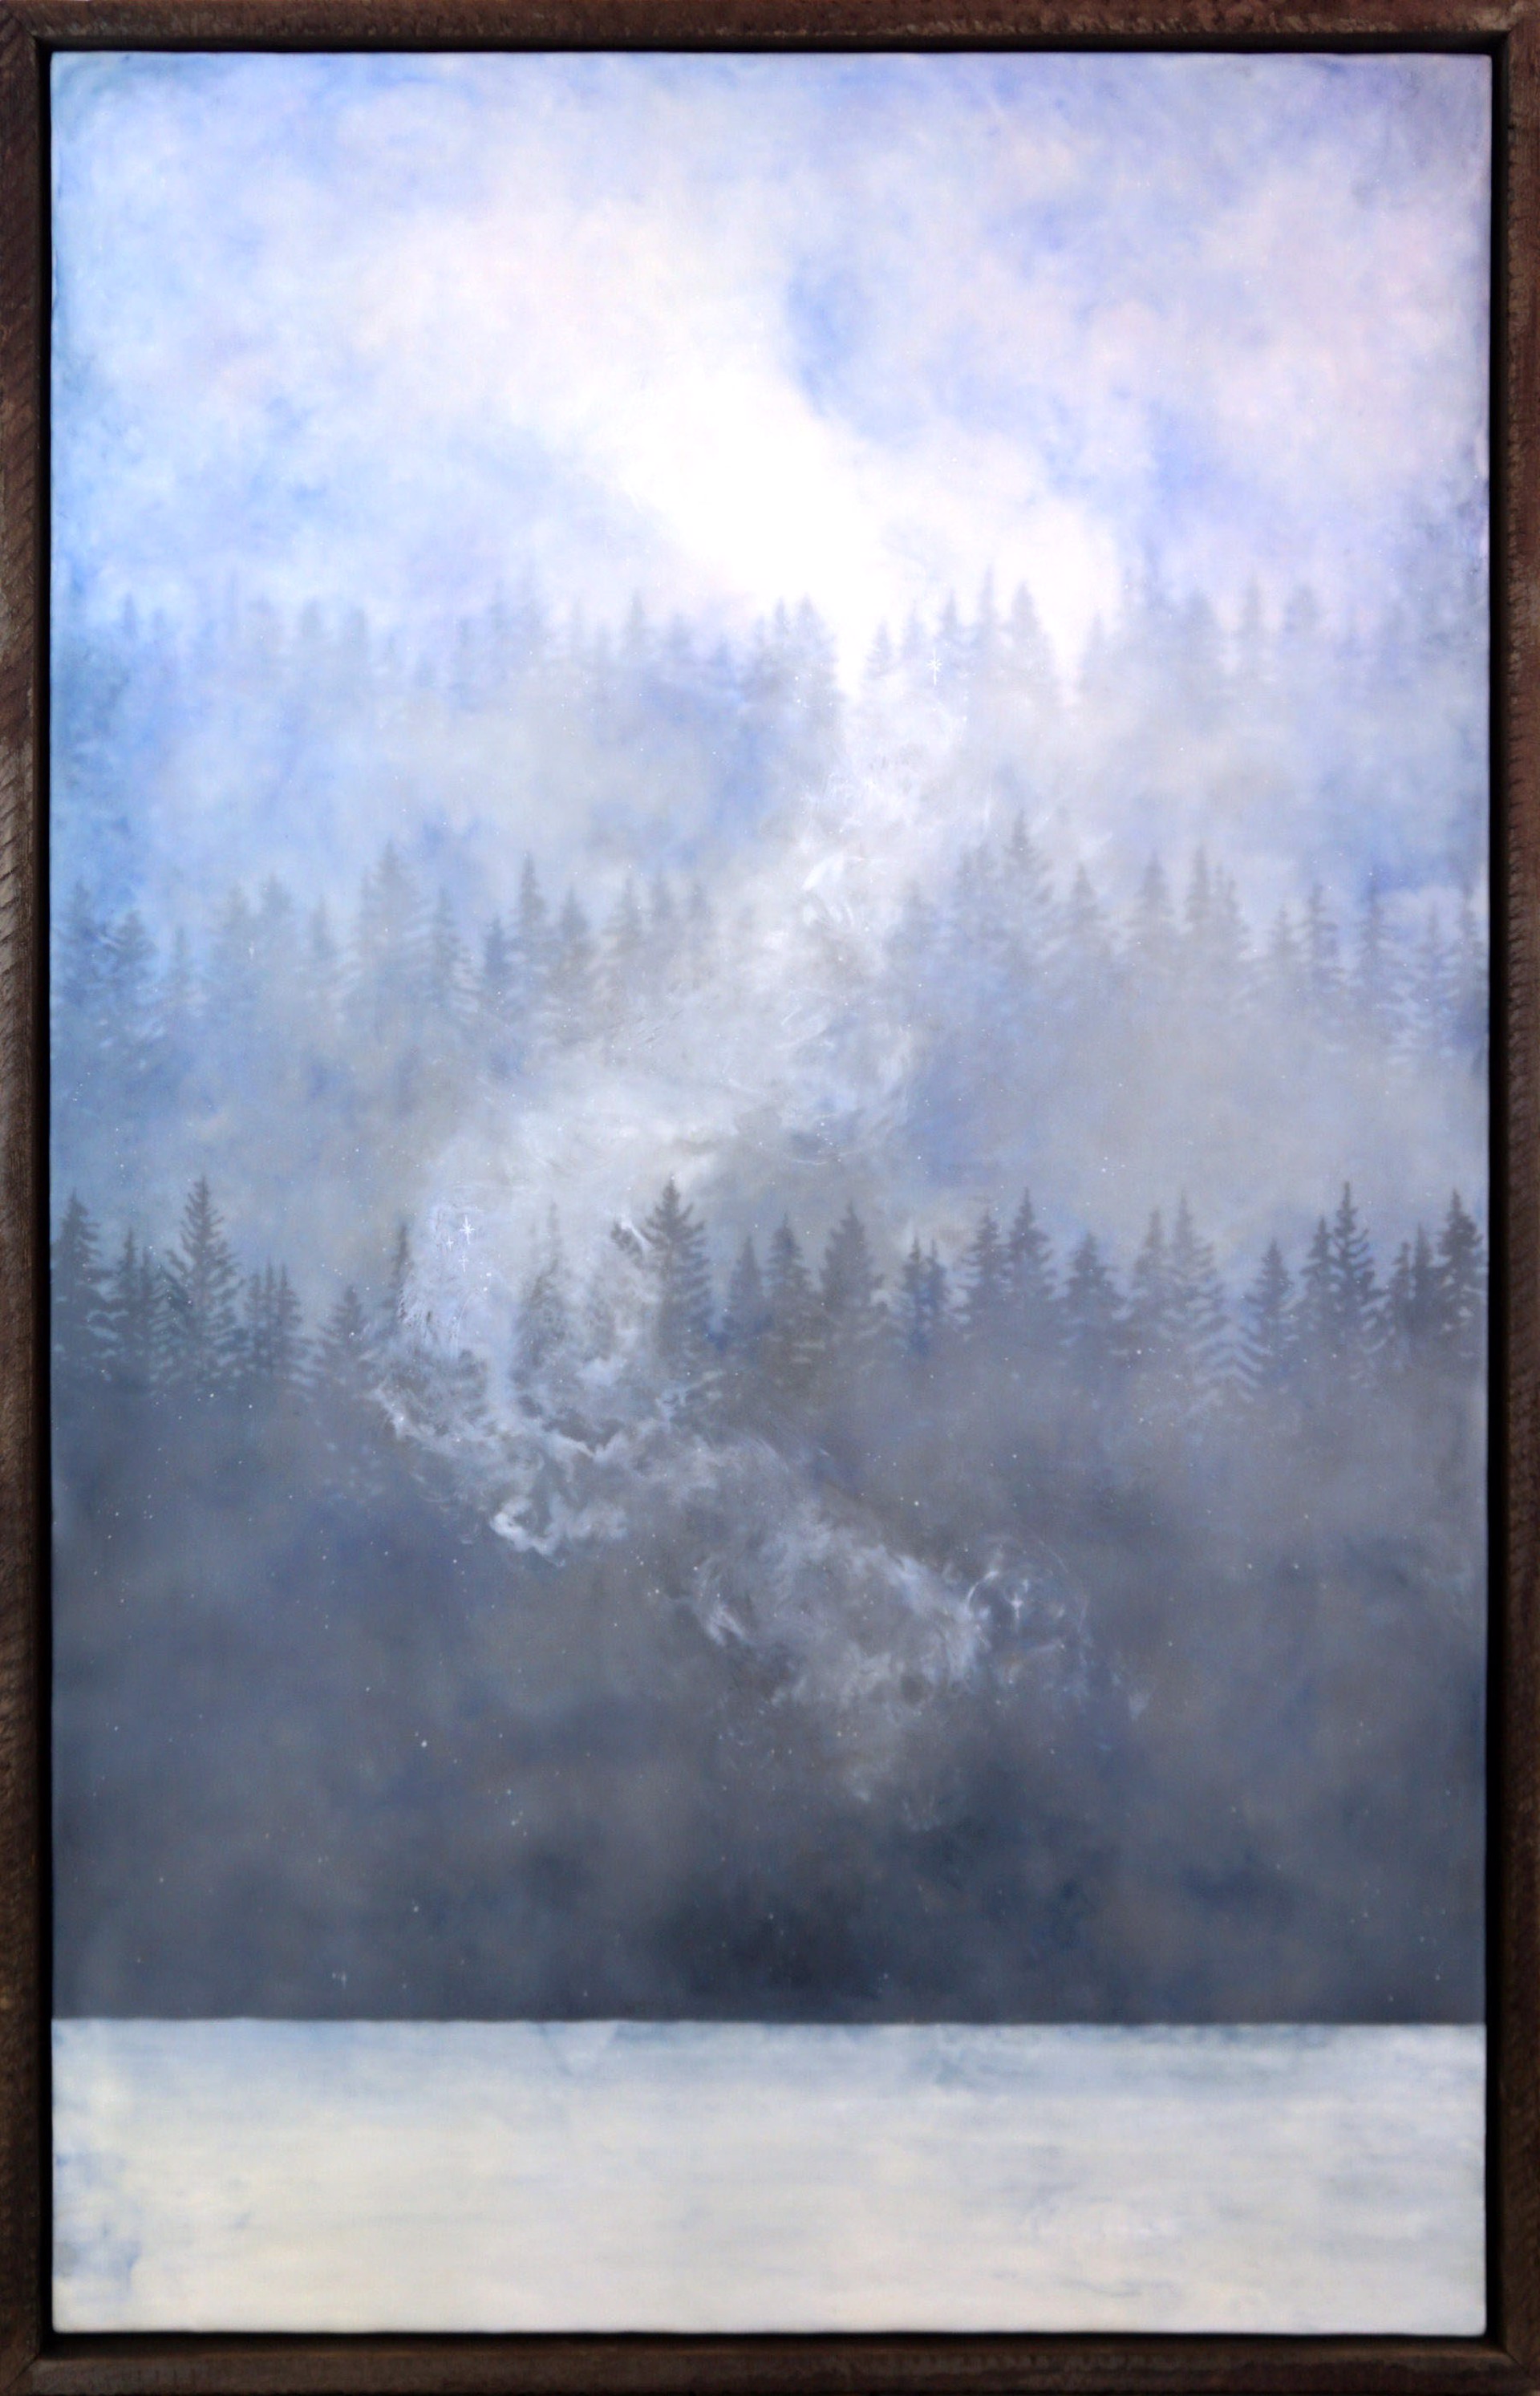 A Contemporary Encaustic Painting Of Pine Trees With Blue Tones By Bridgette Meinhold